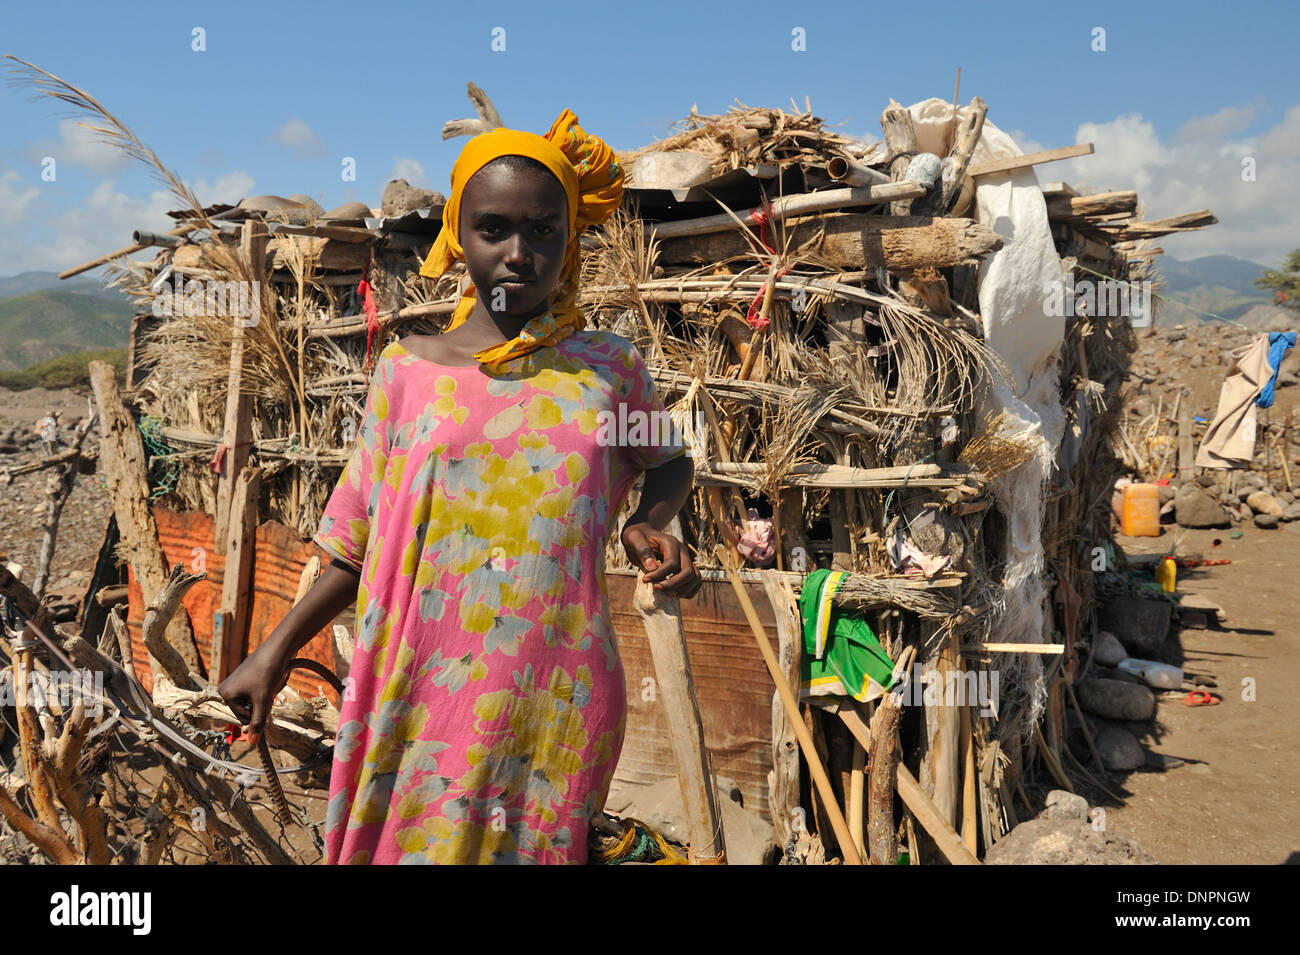 Djiboutian girl posing in a village in northern Djibouti, Horn of Africa Stock Photo